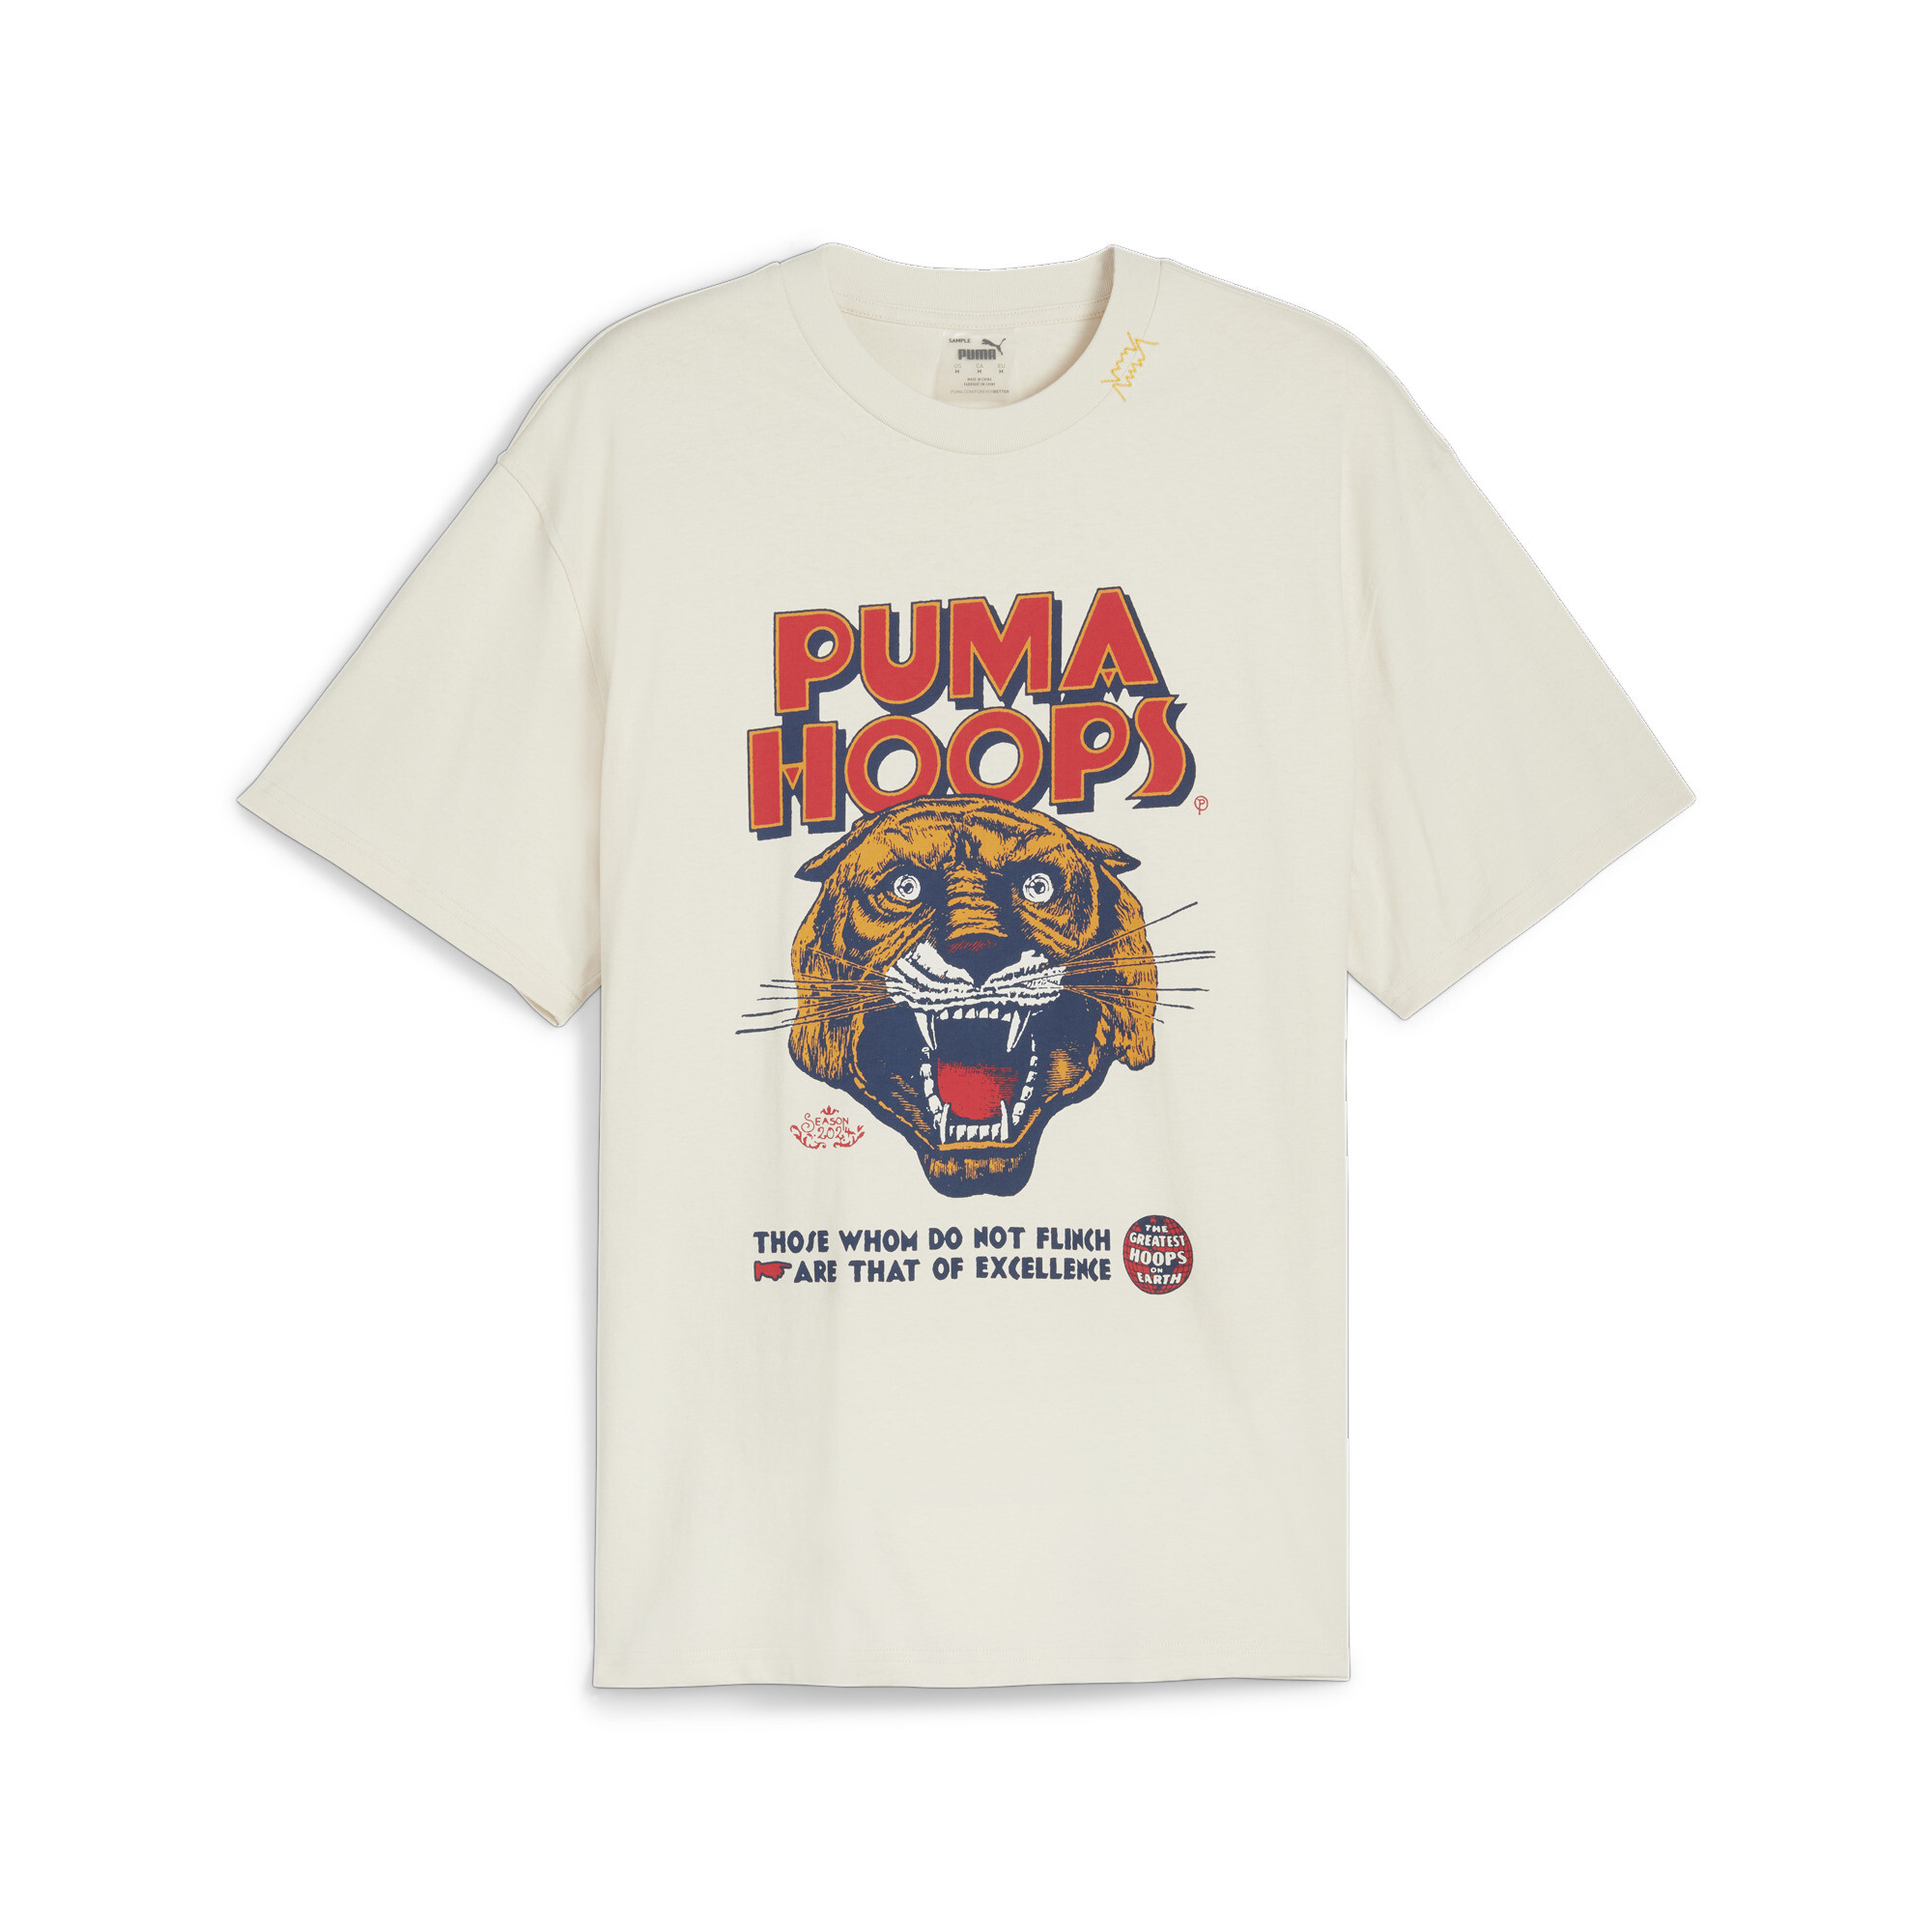 Men's PUMA HOOPS Showtime T-Shirt In White, Size Large